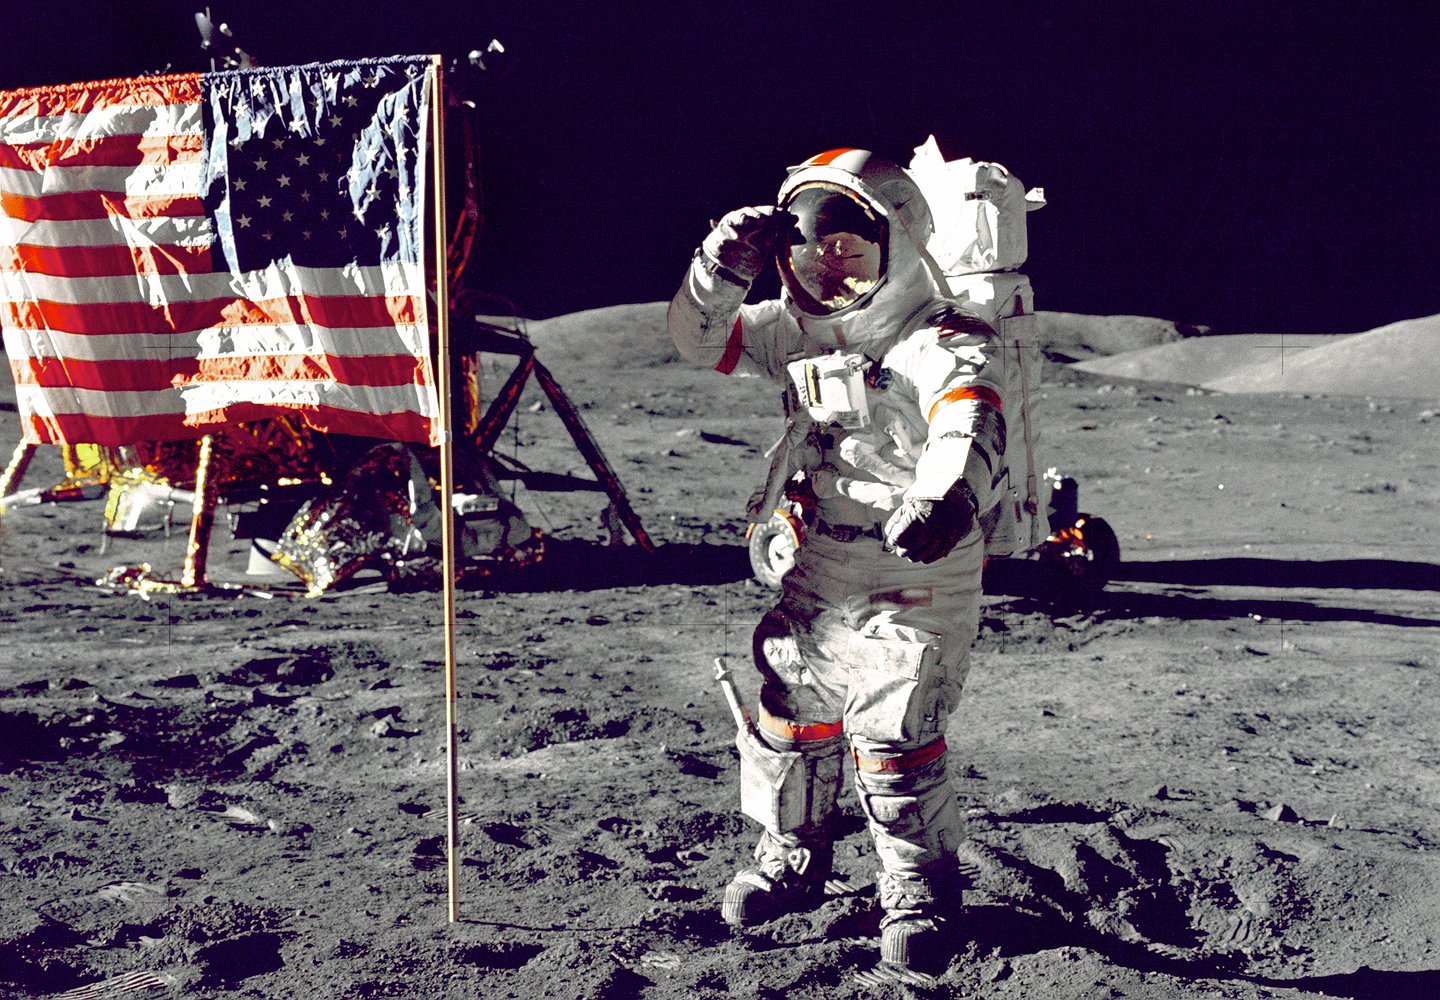 Astronaut-themed books, movies and TV shows ahead of moon anniversary